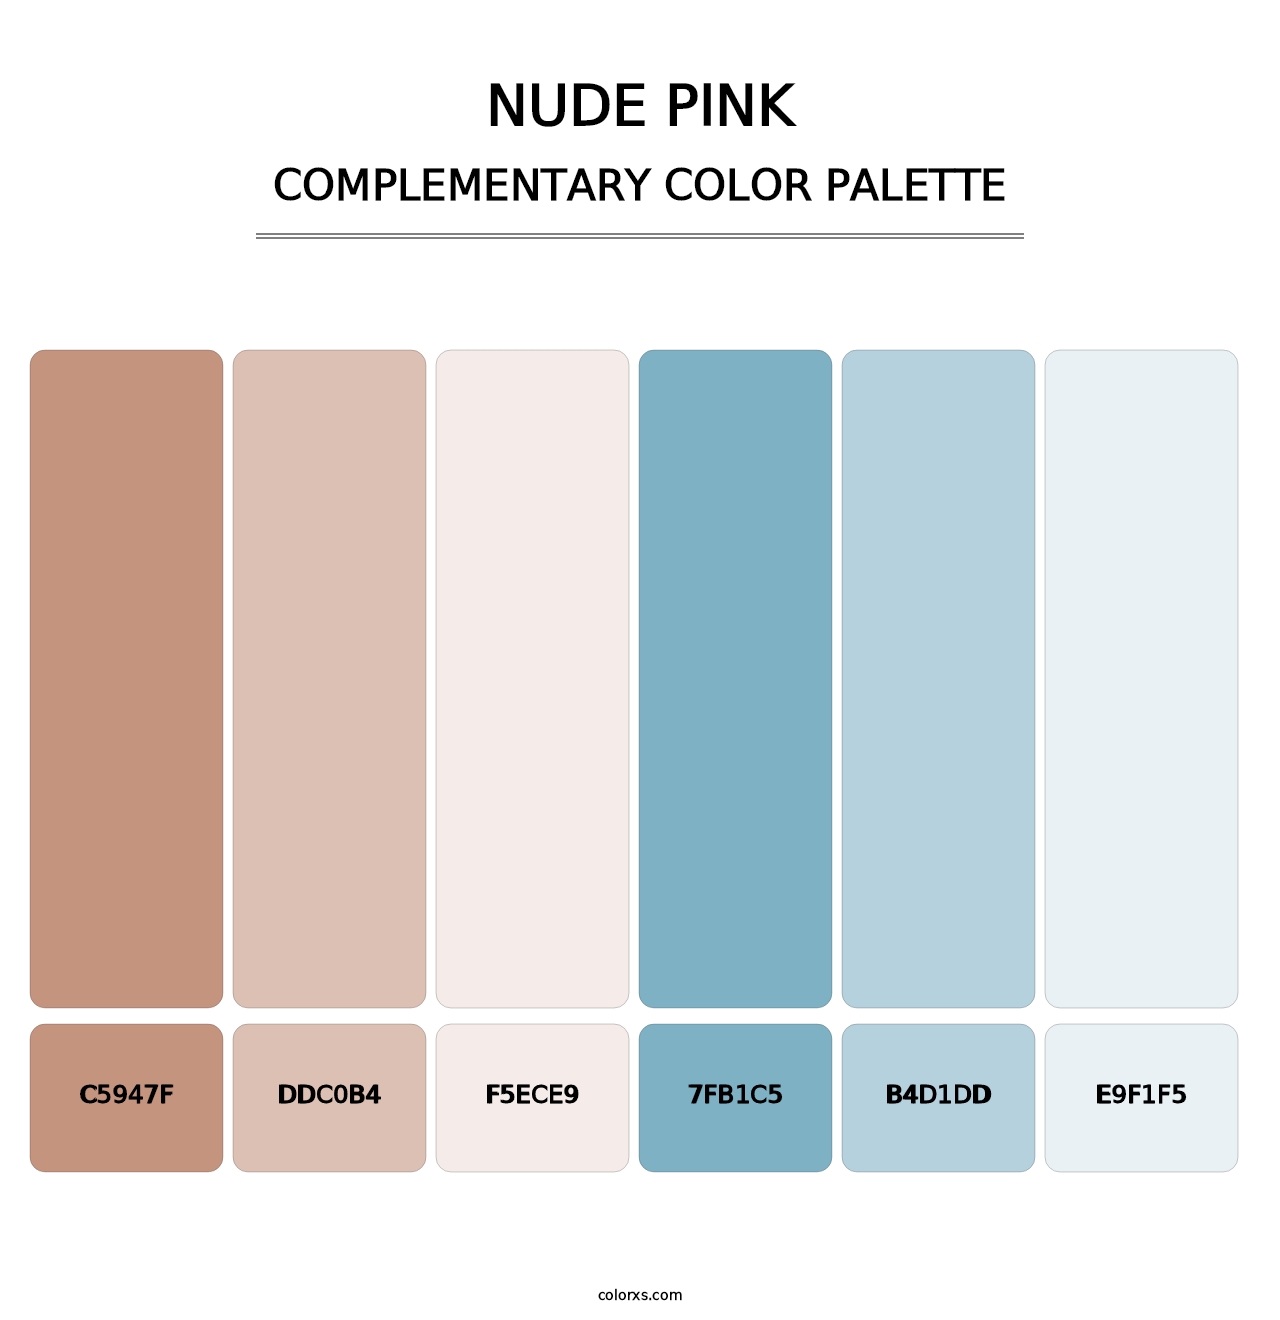 Nude Pink - Complementary Color Palette